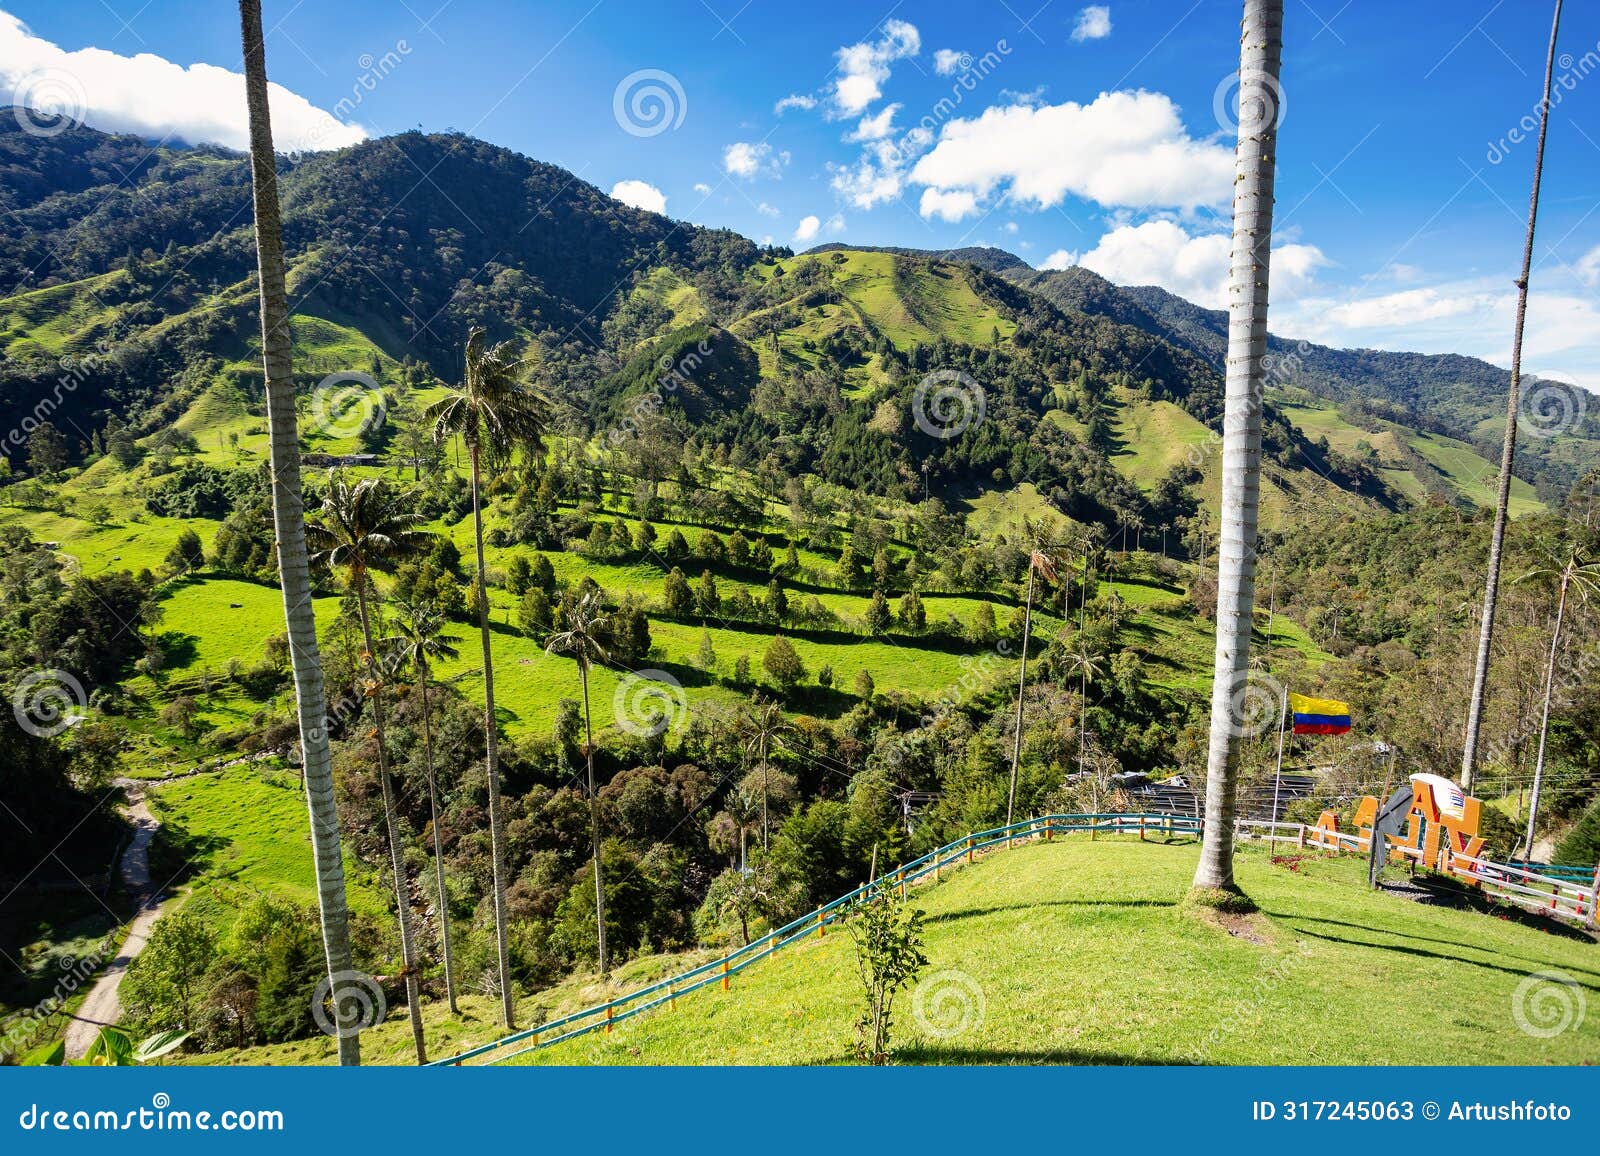 nature landscape of tall wax palm trees in valle del cocora valley. salento, quindio department. colombia mountains landscape.